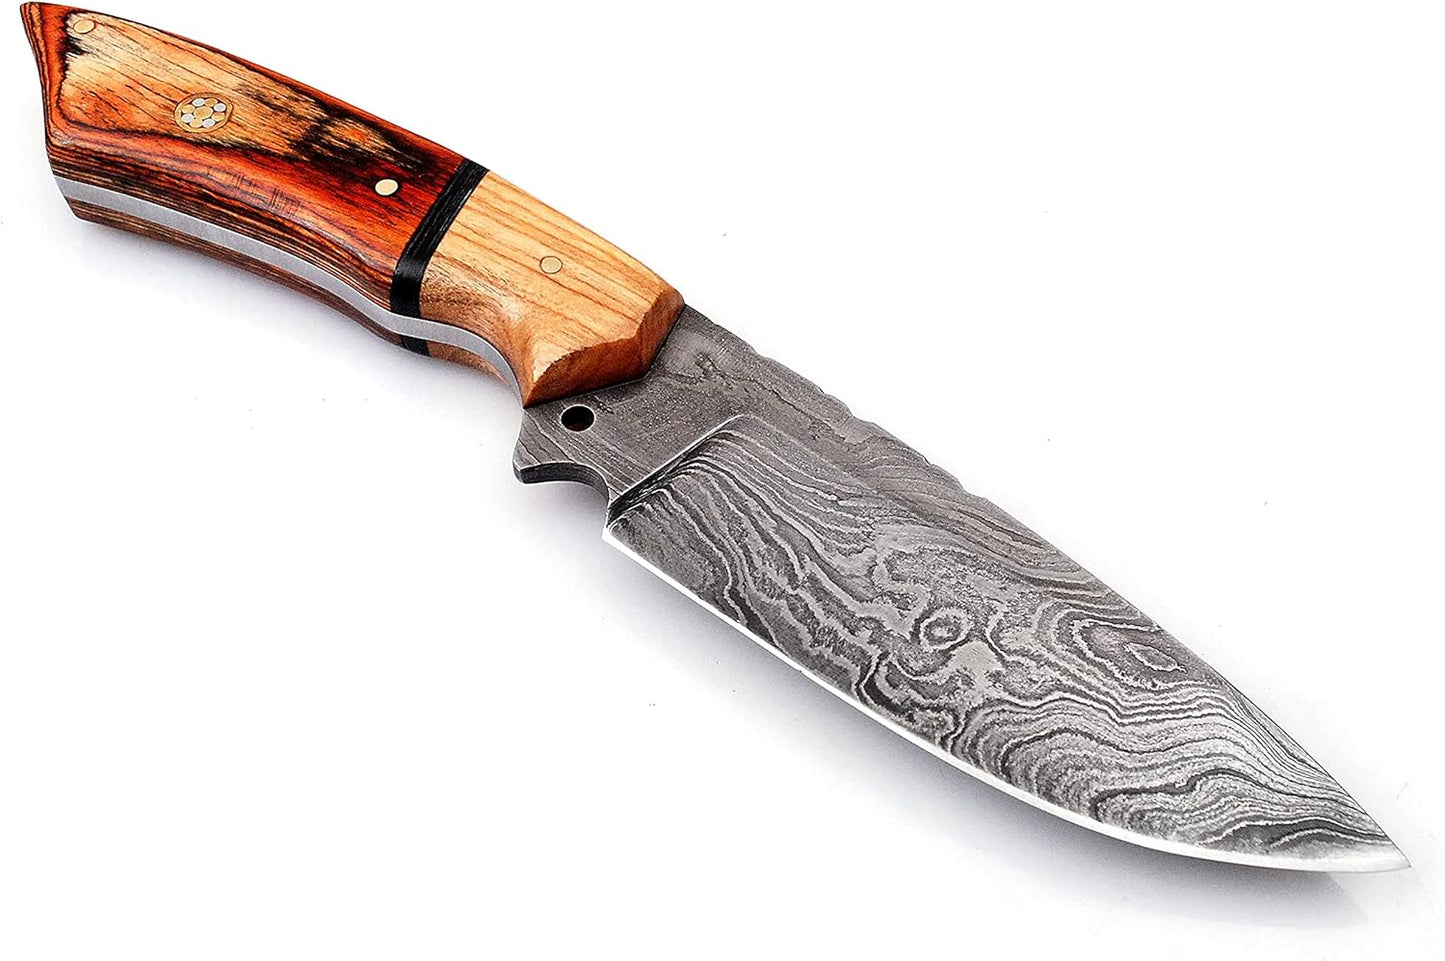 KD Hunting Knife 9" Damascus Steel Fixed Blade Hunting Knife with Sheath